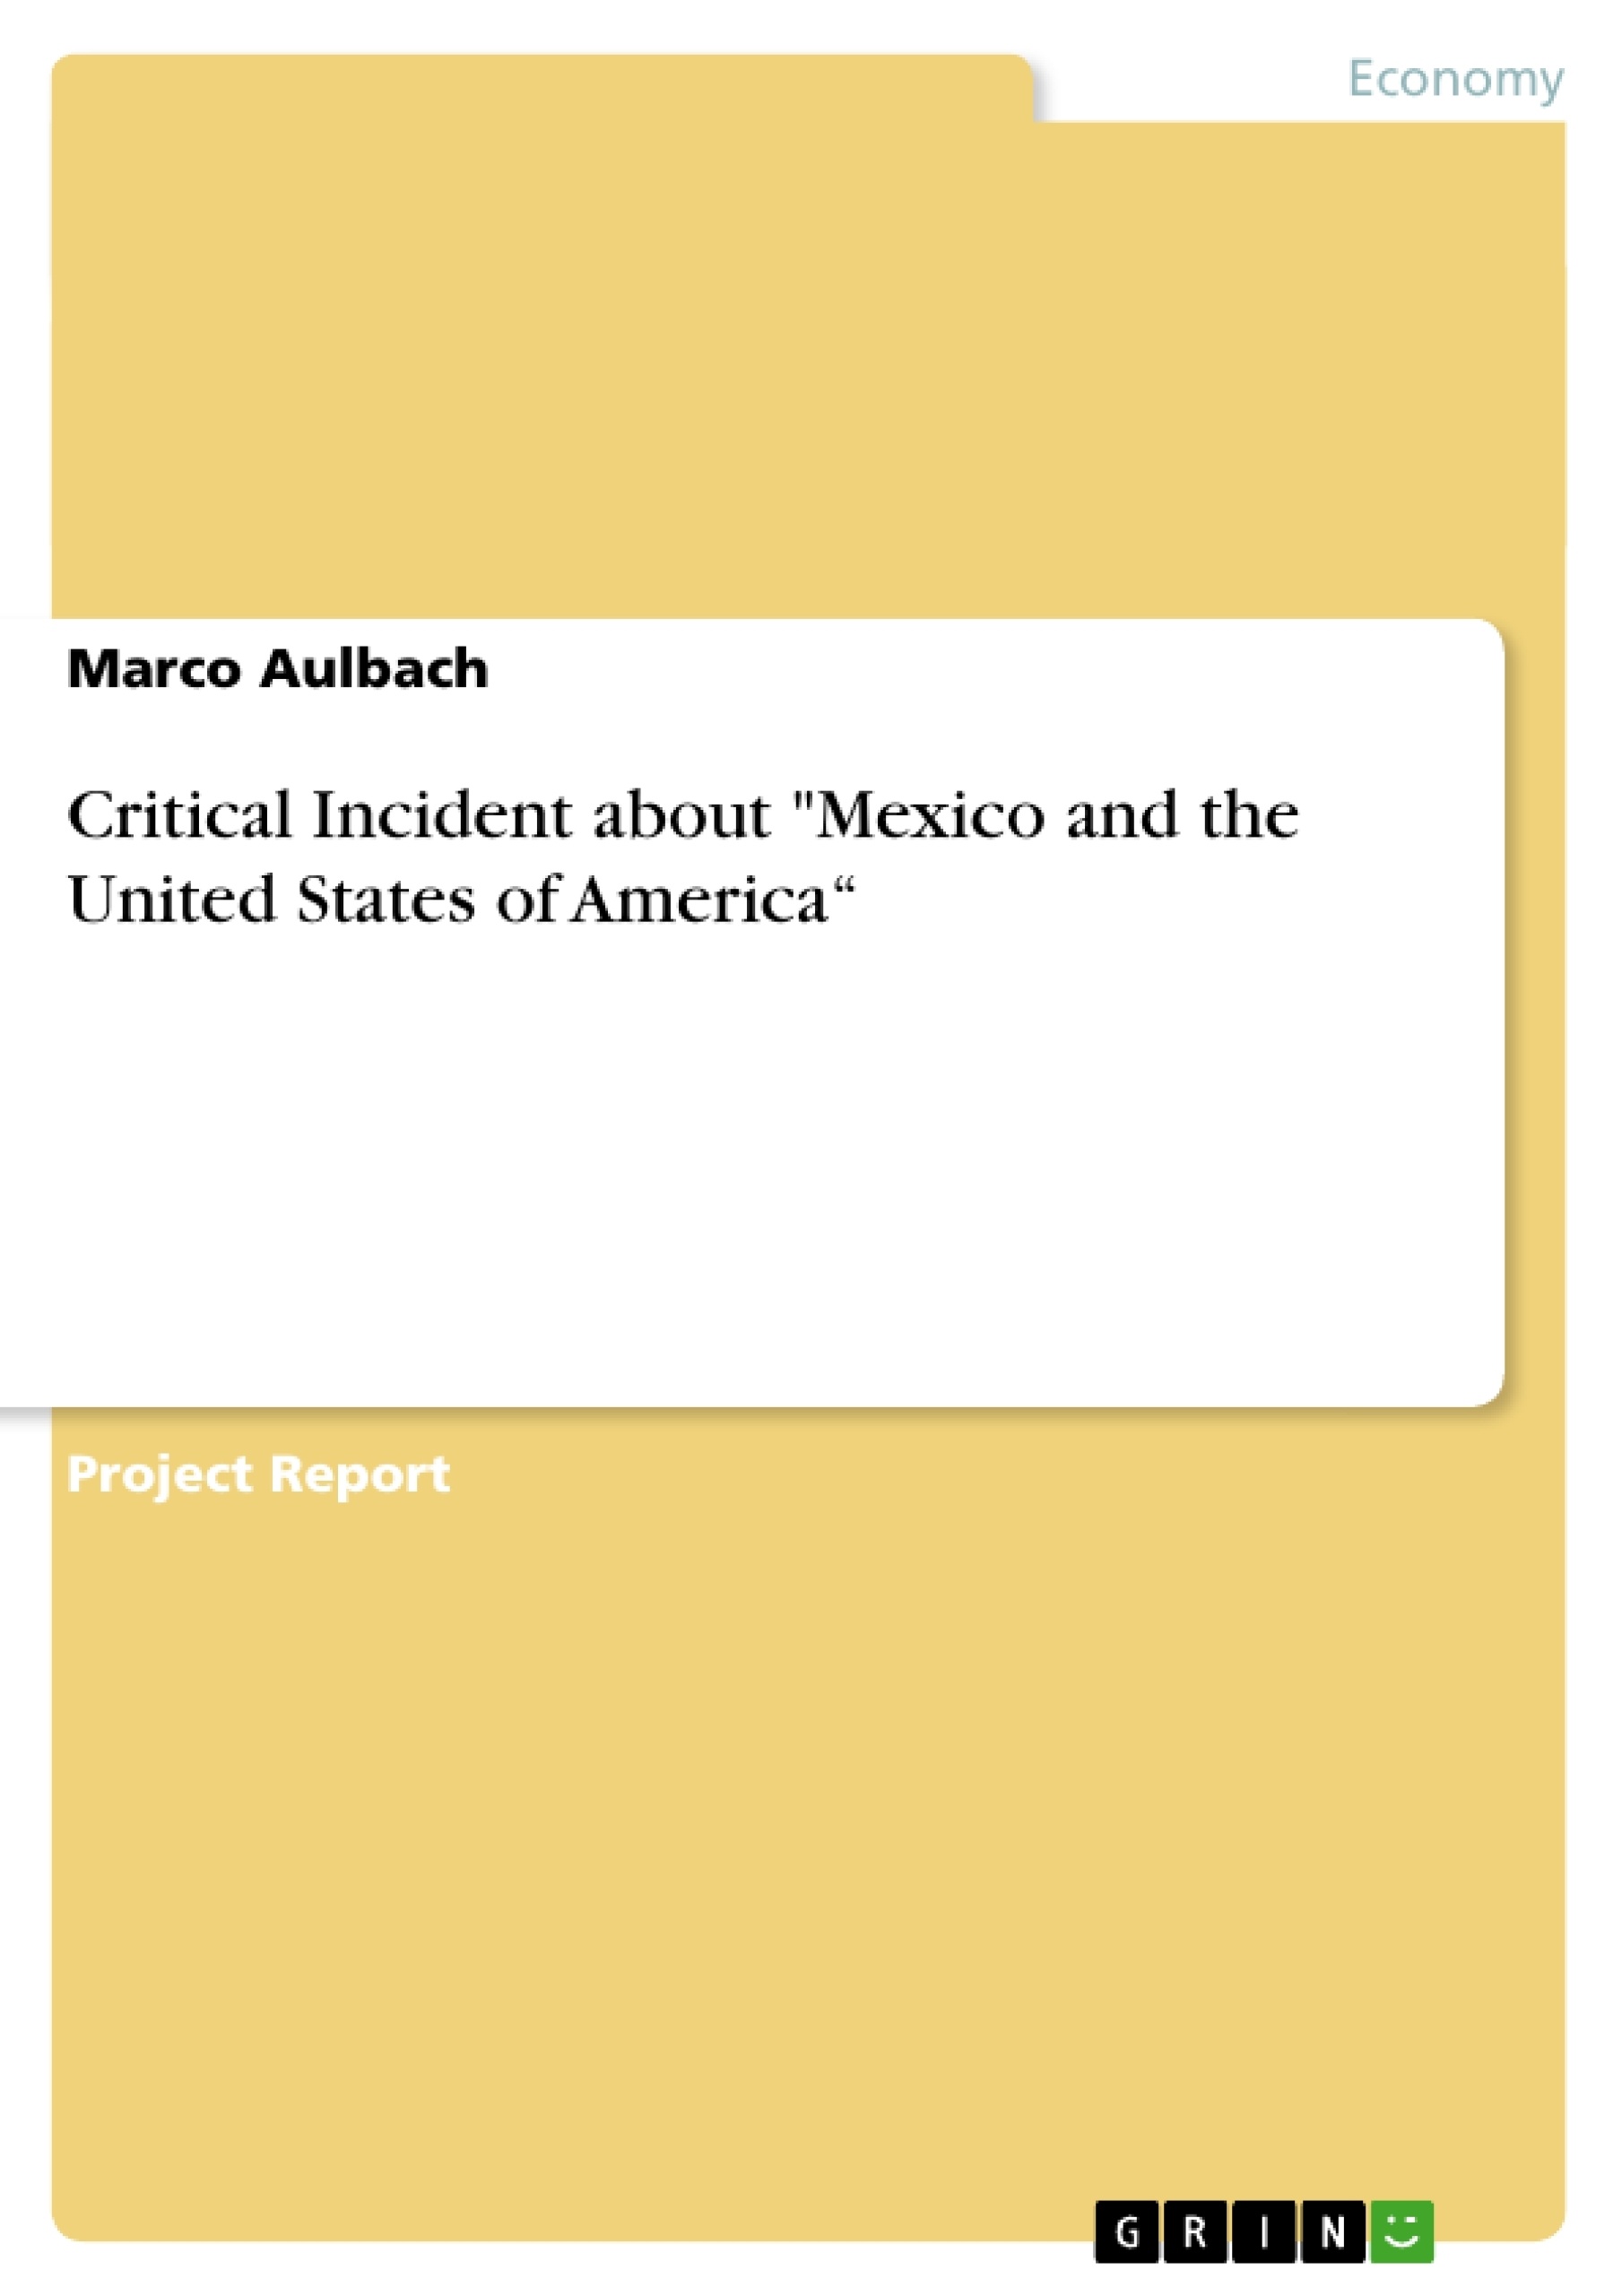 Title: Critical Incident about "Mexico and the United States of America“